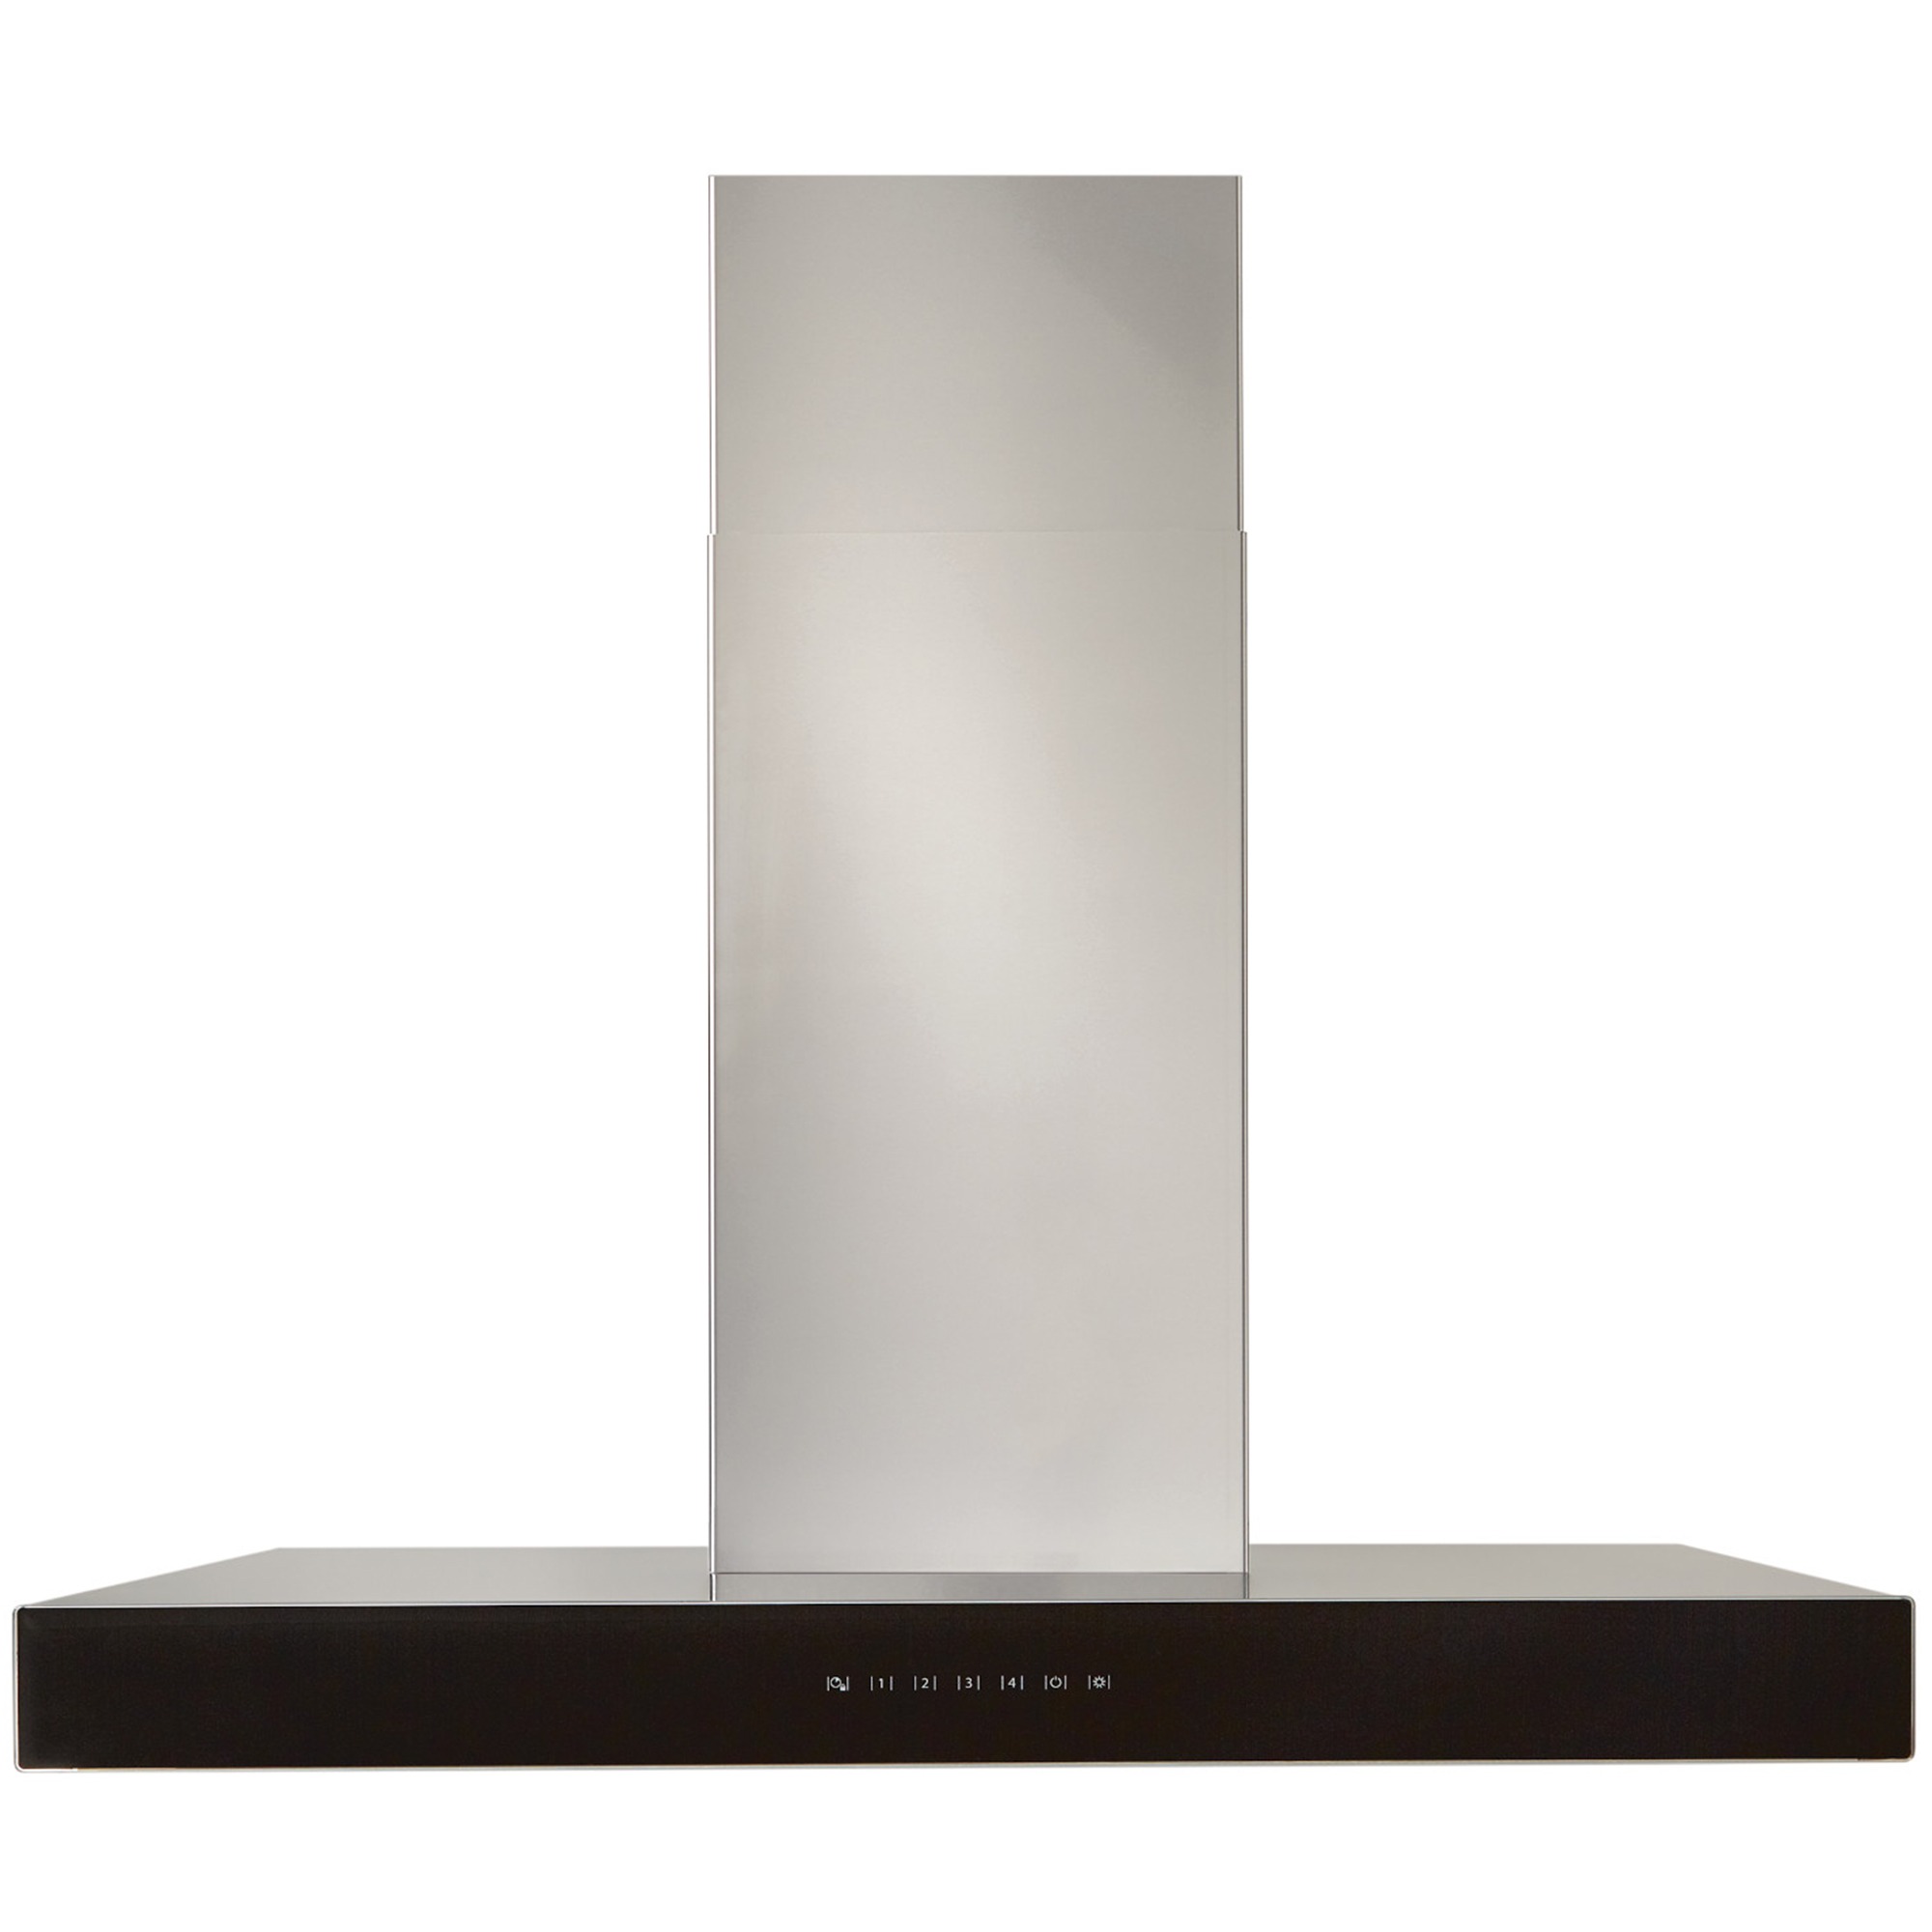 Best Ispira series 36" Chimney Style Range Hood with 4 Speed Settings, 650 CFM, Ducted Venting & 2 LED Lights - Stainless Steel (WCB3I36SBB)